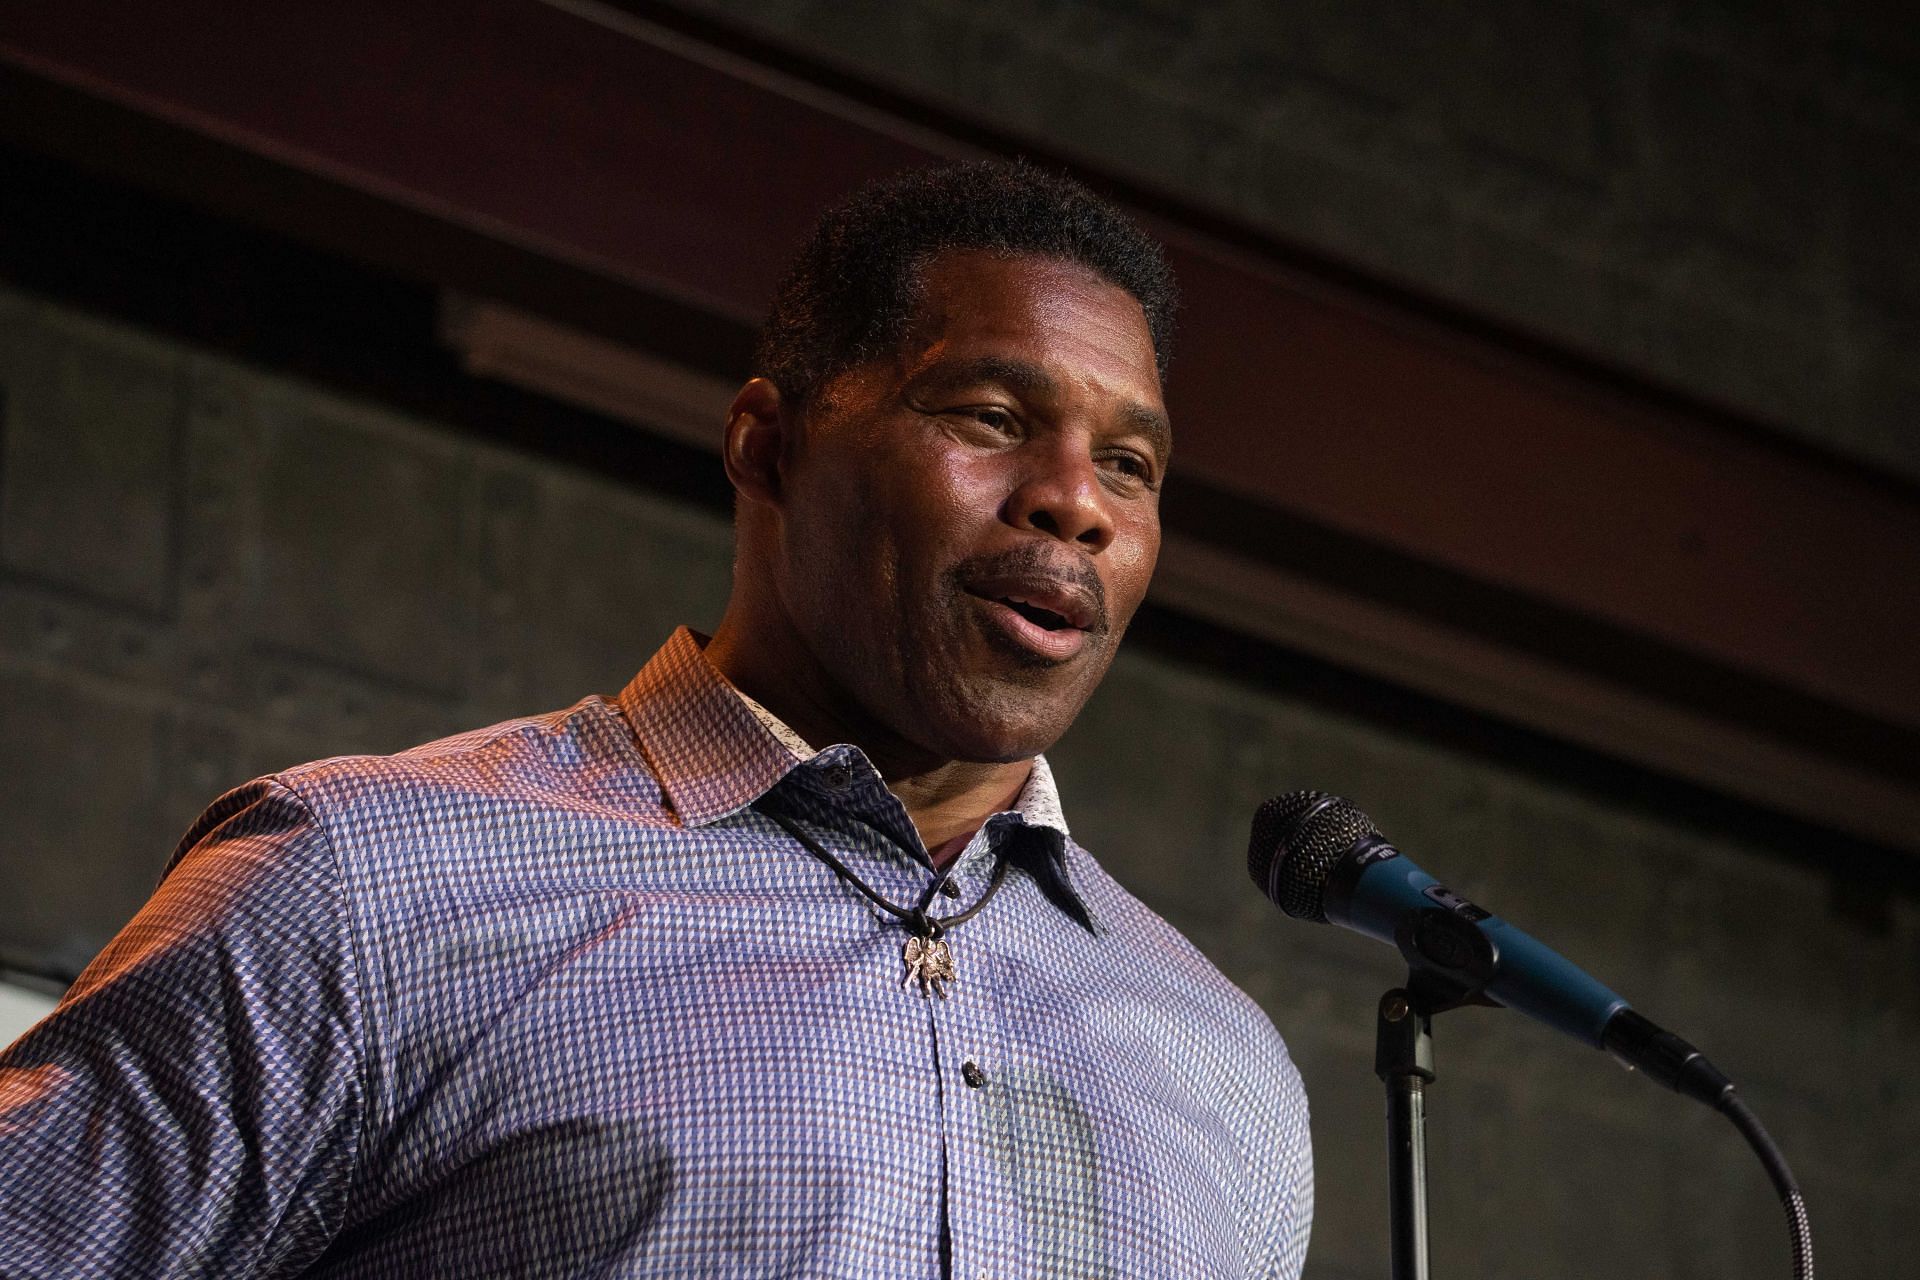 Georgia GOP Senate Candidate Herschel Walker Holds Rally Day Before Primary Election